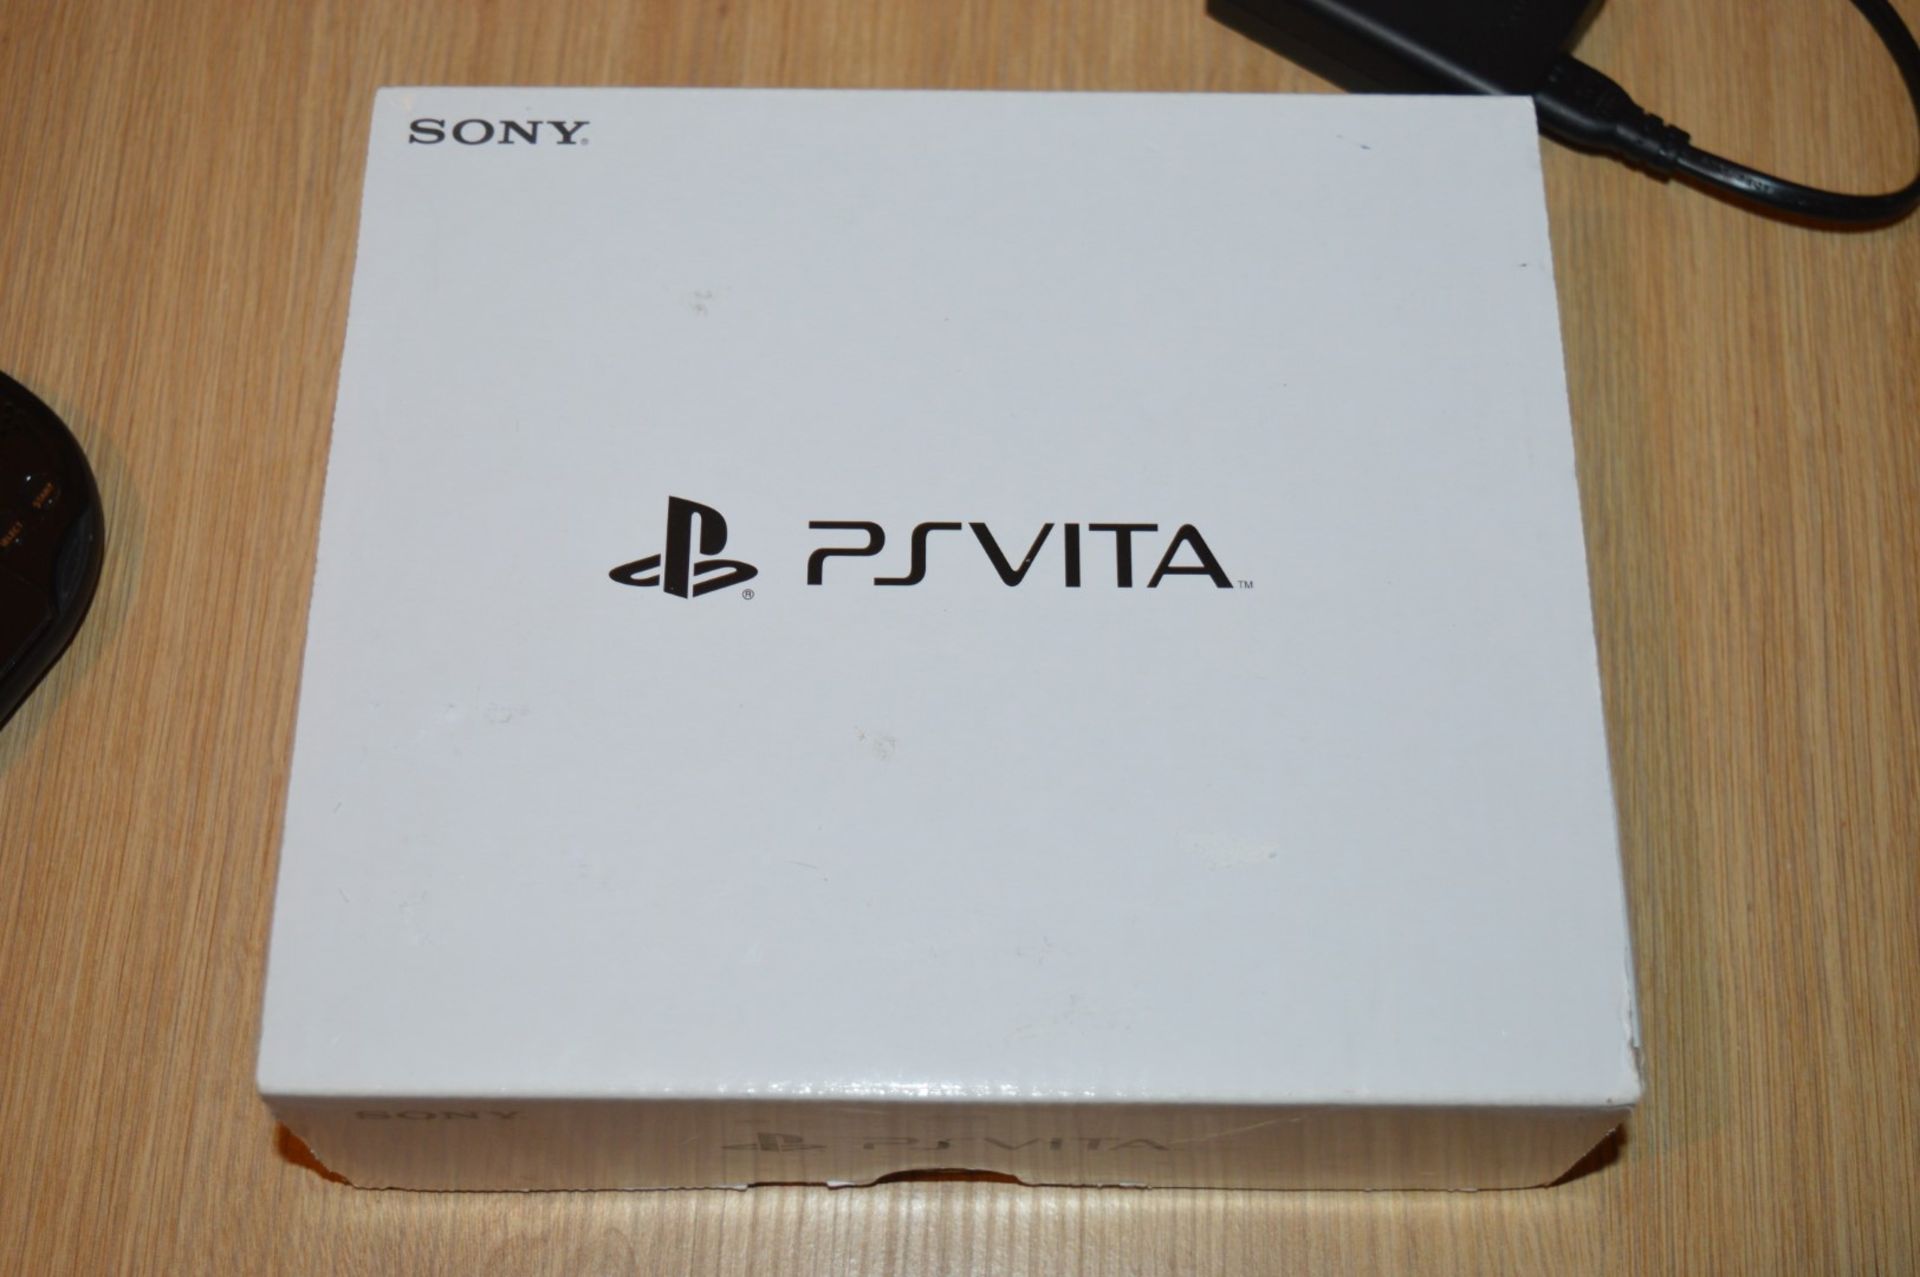 1 x Sony PS Vita Handheld Playstation Games Console - Boxed With Charger and Game - In Good - Image 4 of 4